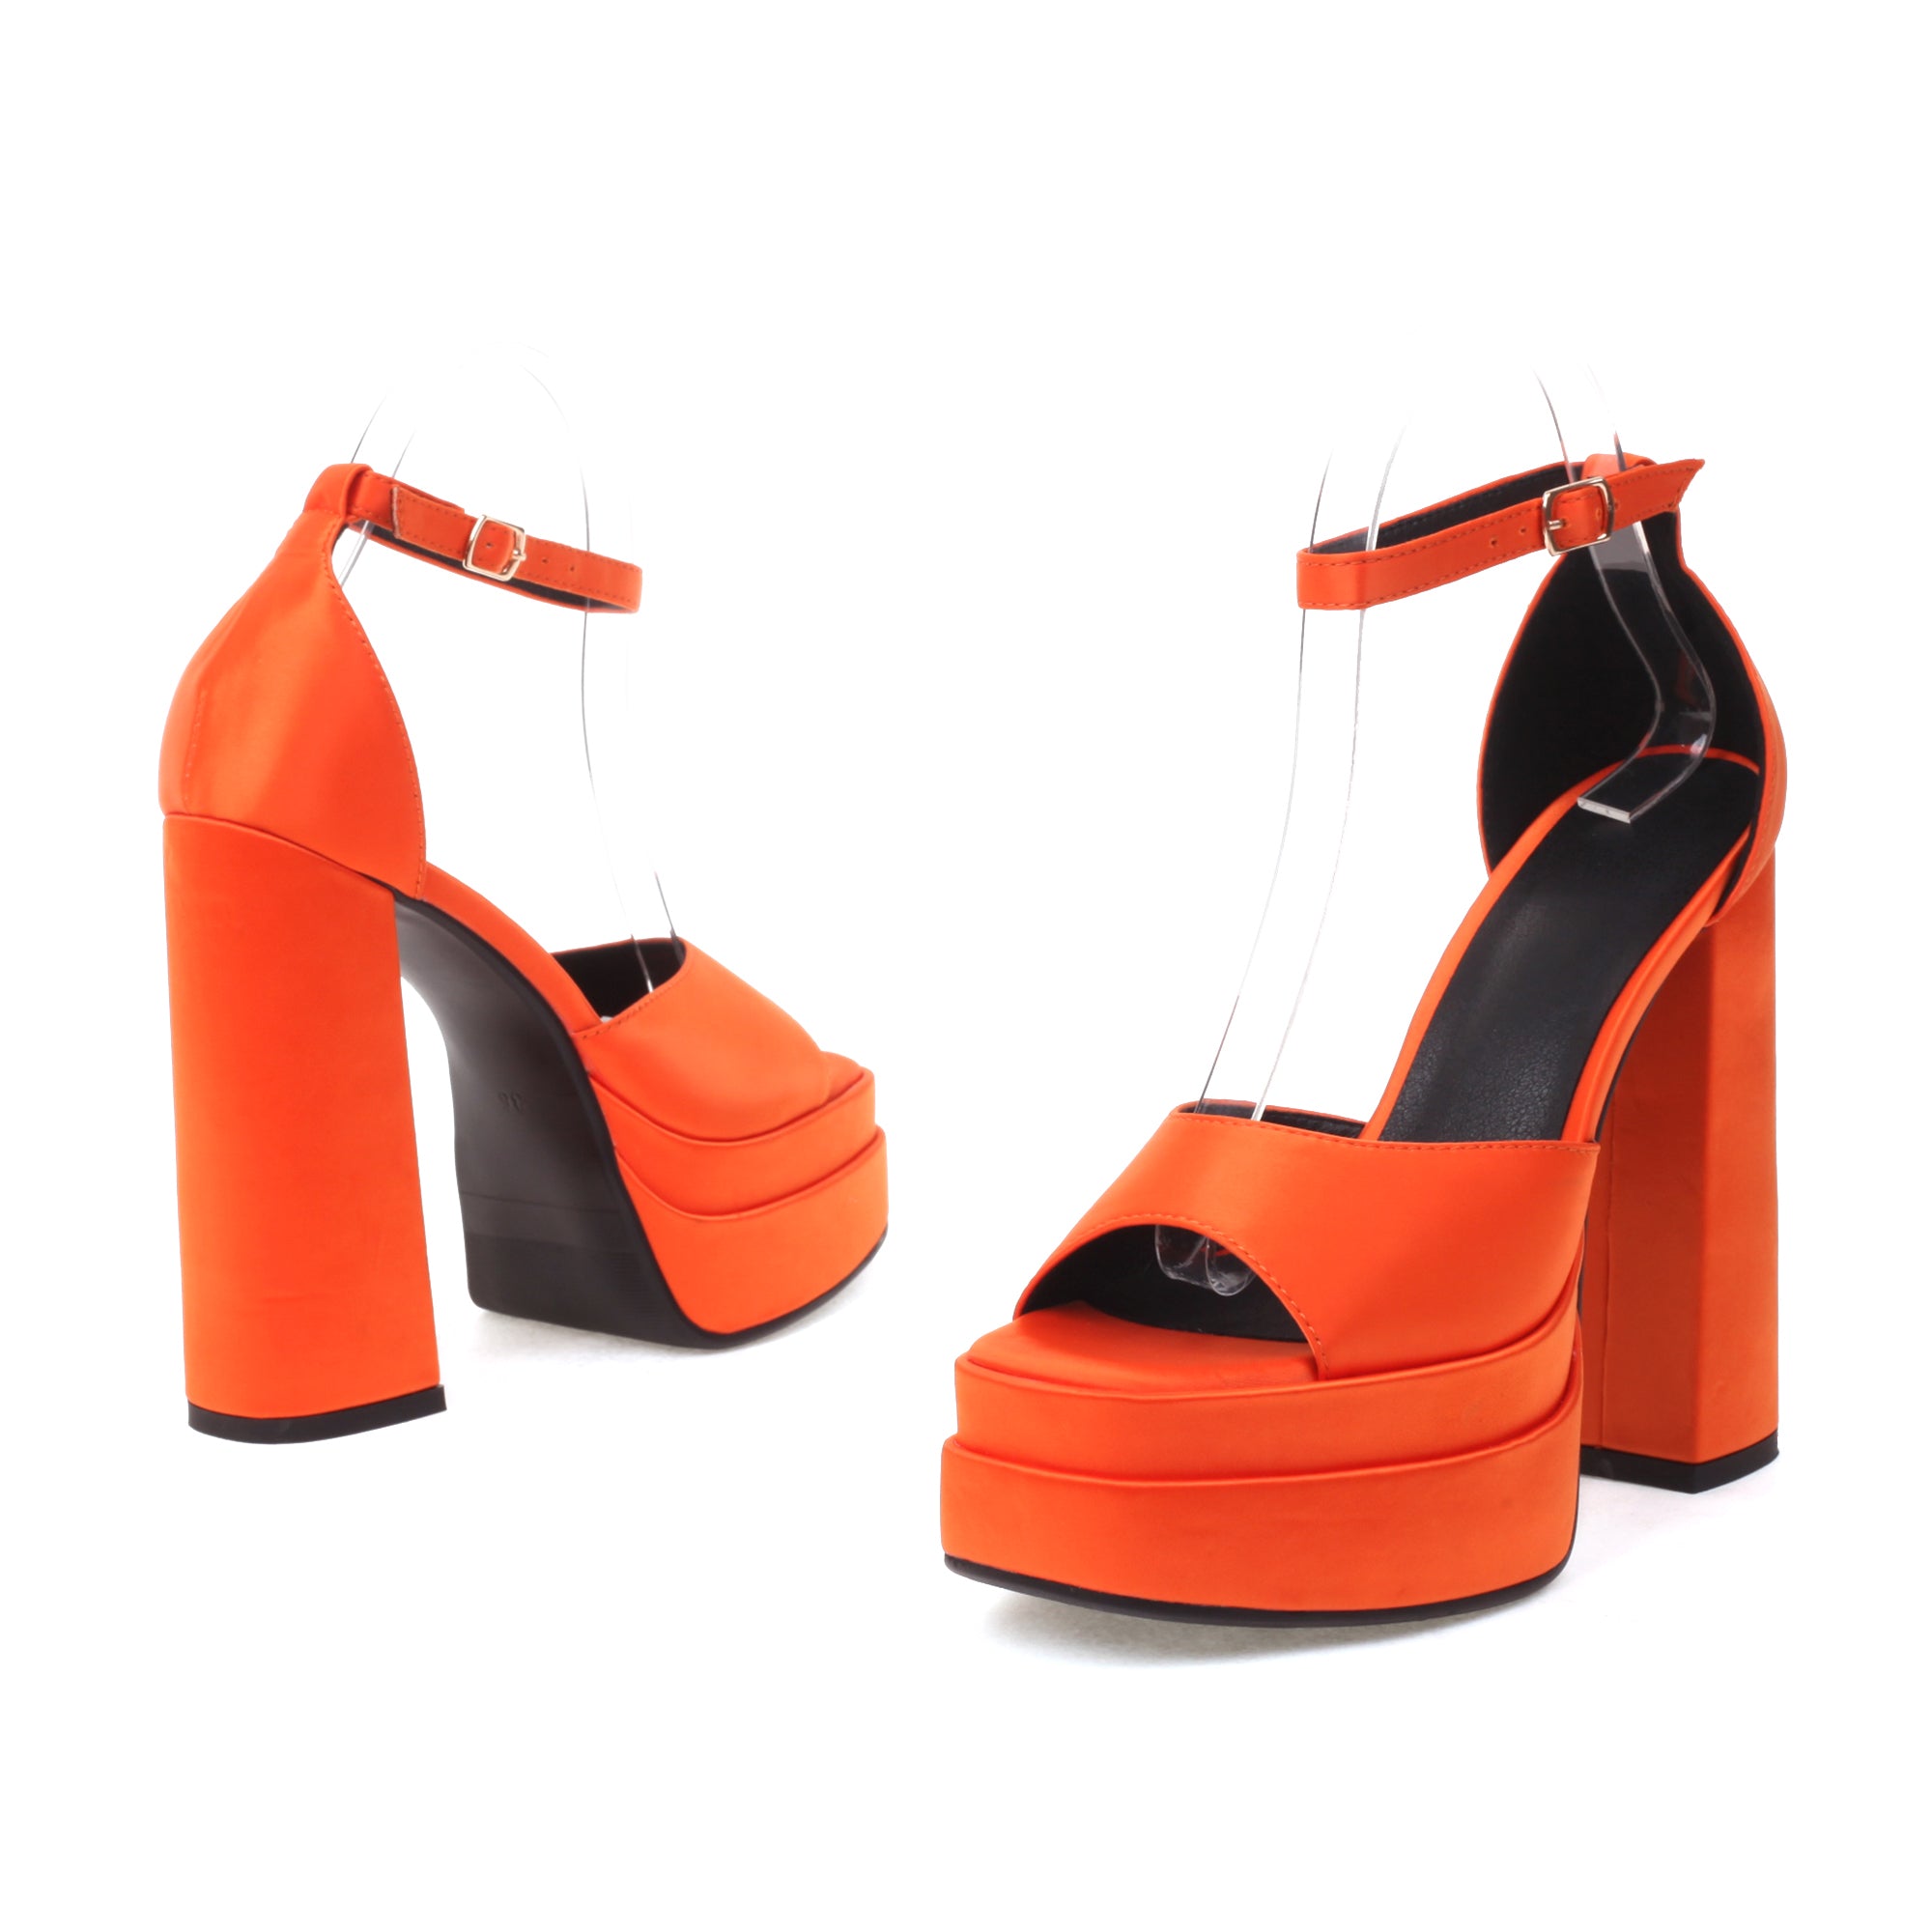 the Sexy Platform Ankle Strap Open Toe Sandals-Orange are from bigsizeheels